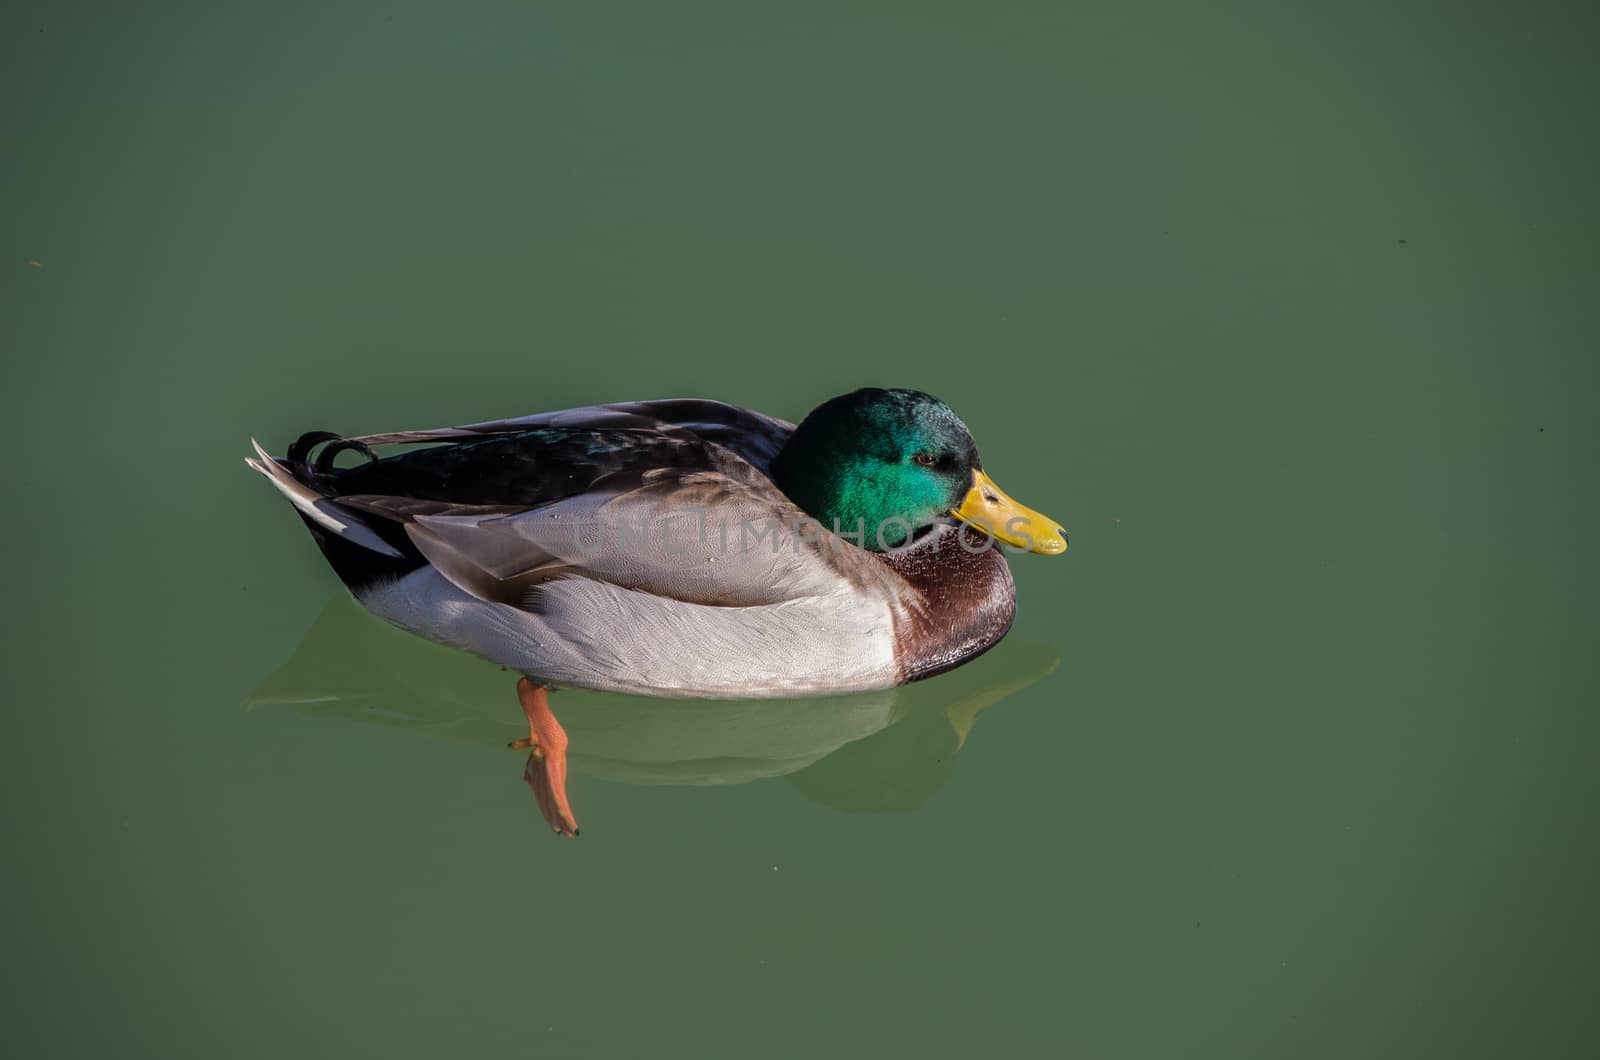 Funny duck swimming on a lake surface